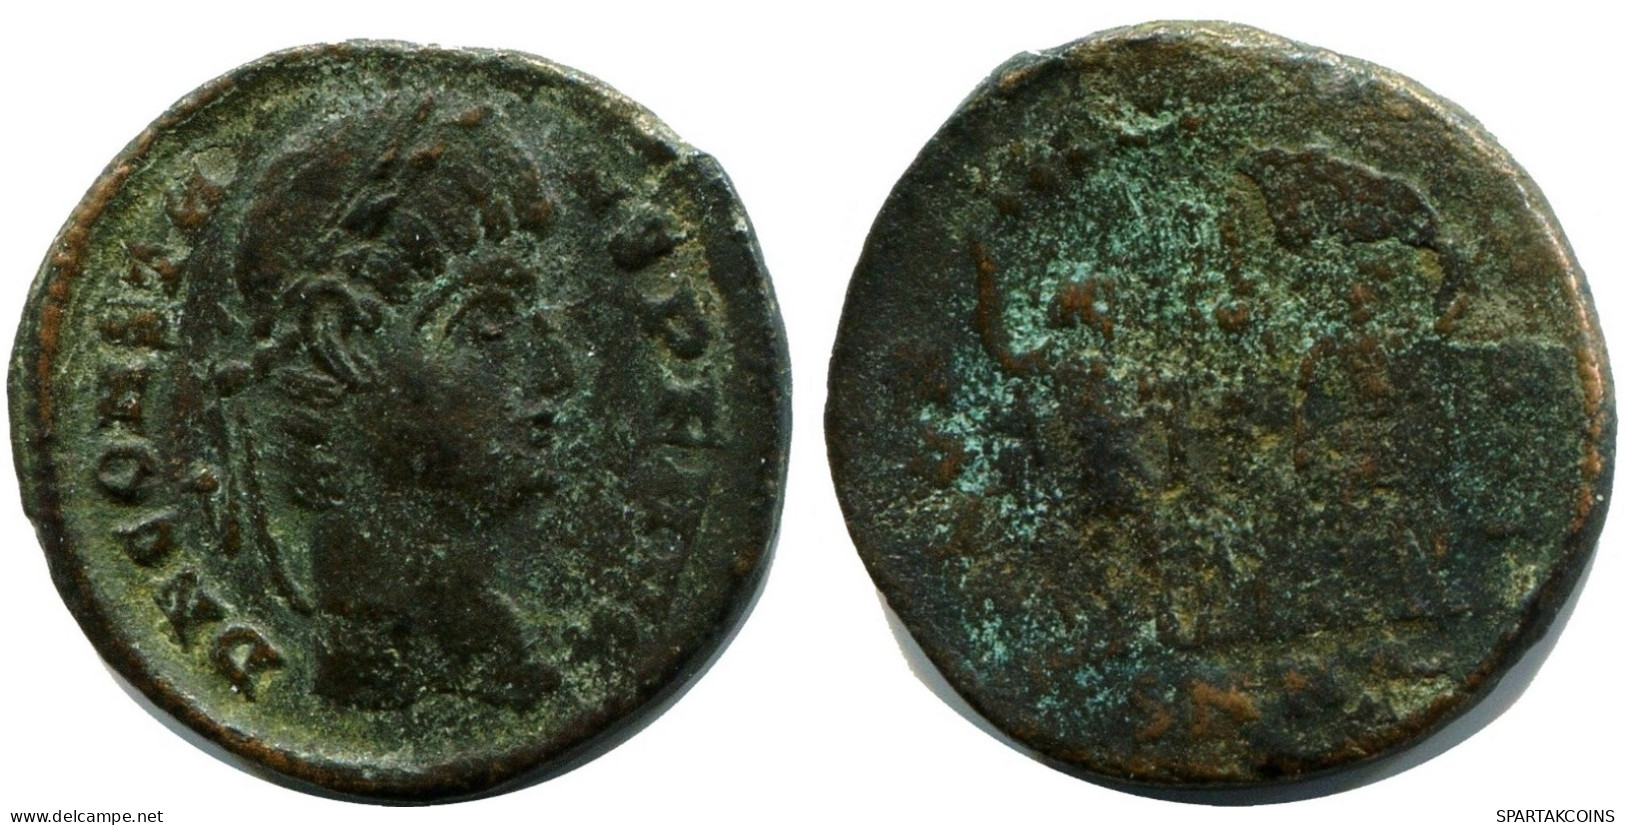 CONSTANS MINTED IN NICOMEDIA FOUND IN IHNASYAH HOARD EGYPT #ANC11717.14.F.A - The Christian Empire (307 AD Tot 363 AD)